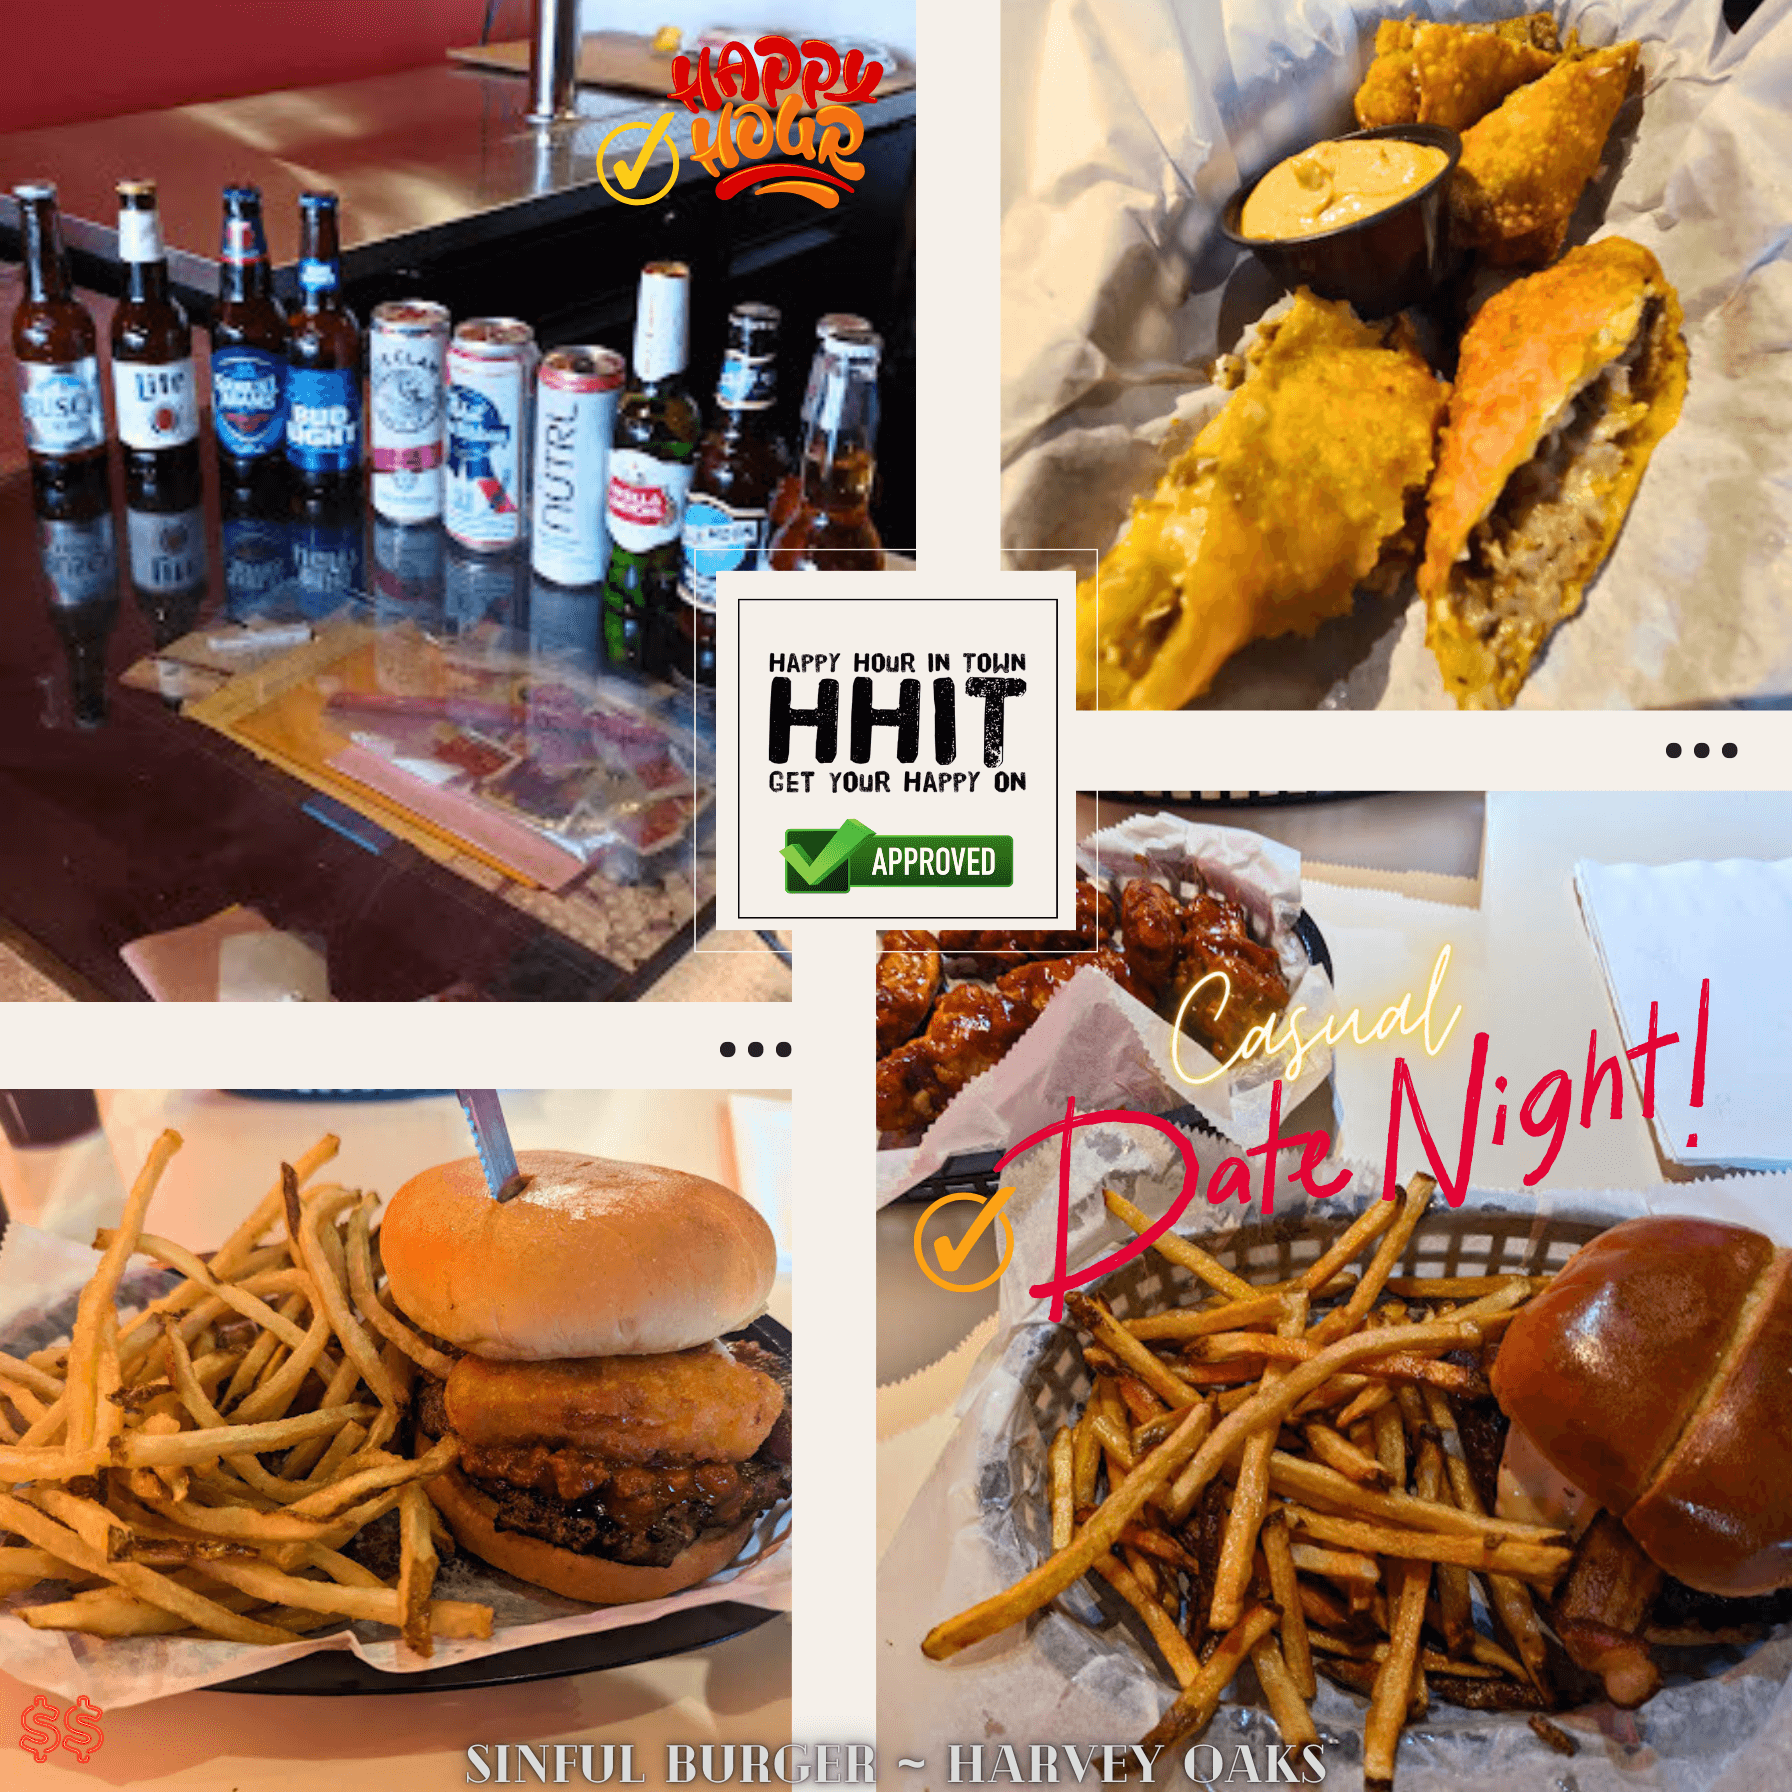 Sinful Burger Omaha Happy Hour In Town